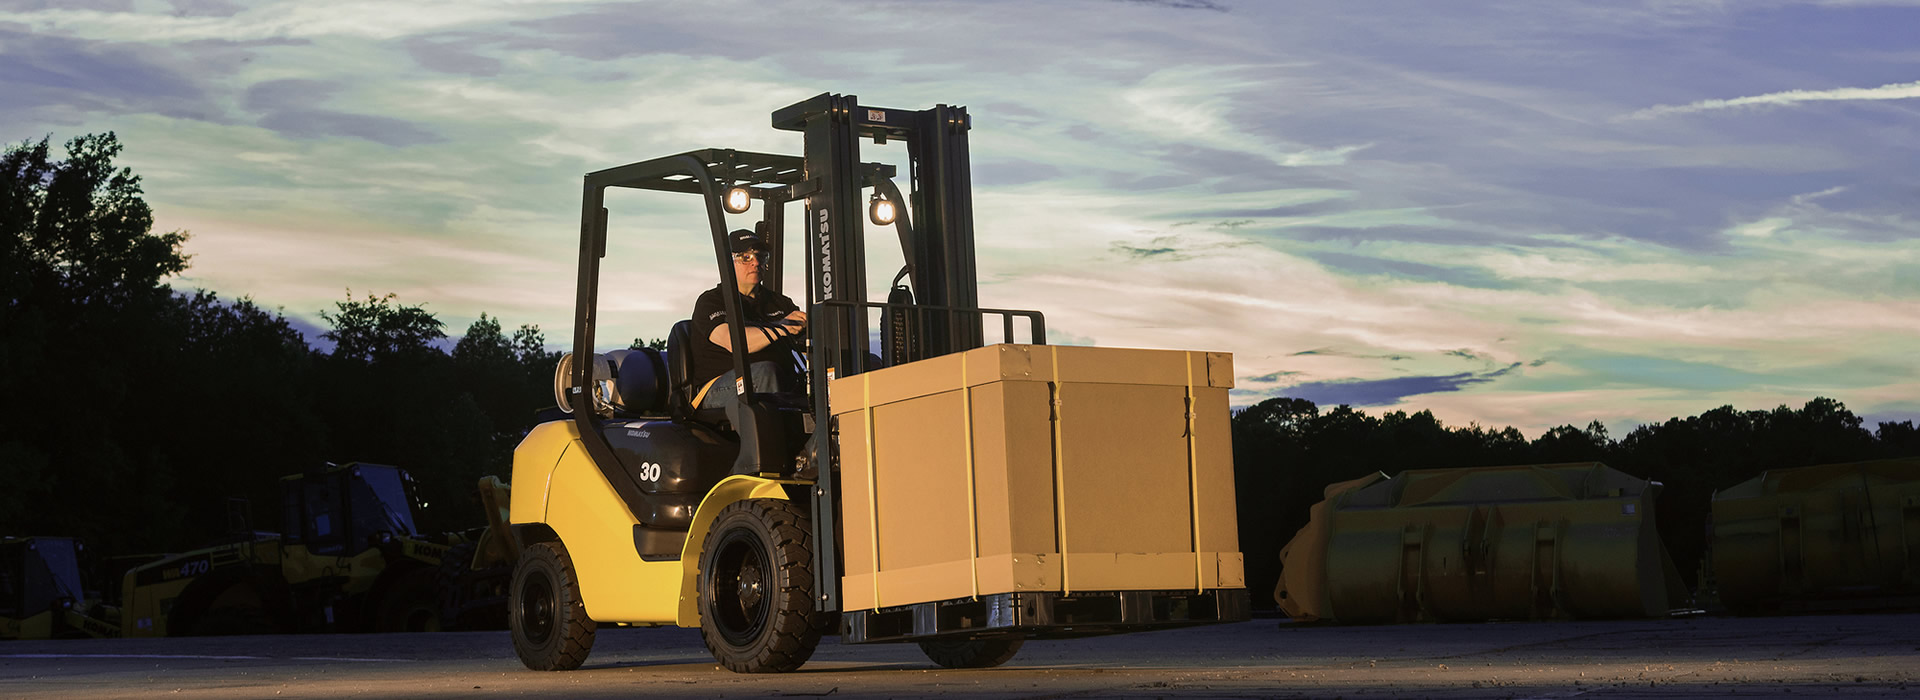 forklift carrying a large box